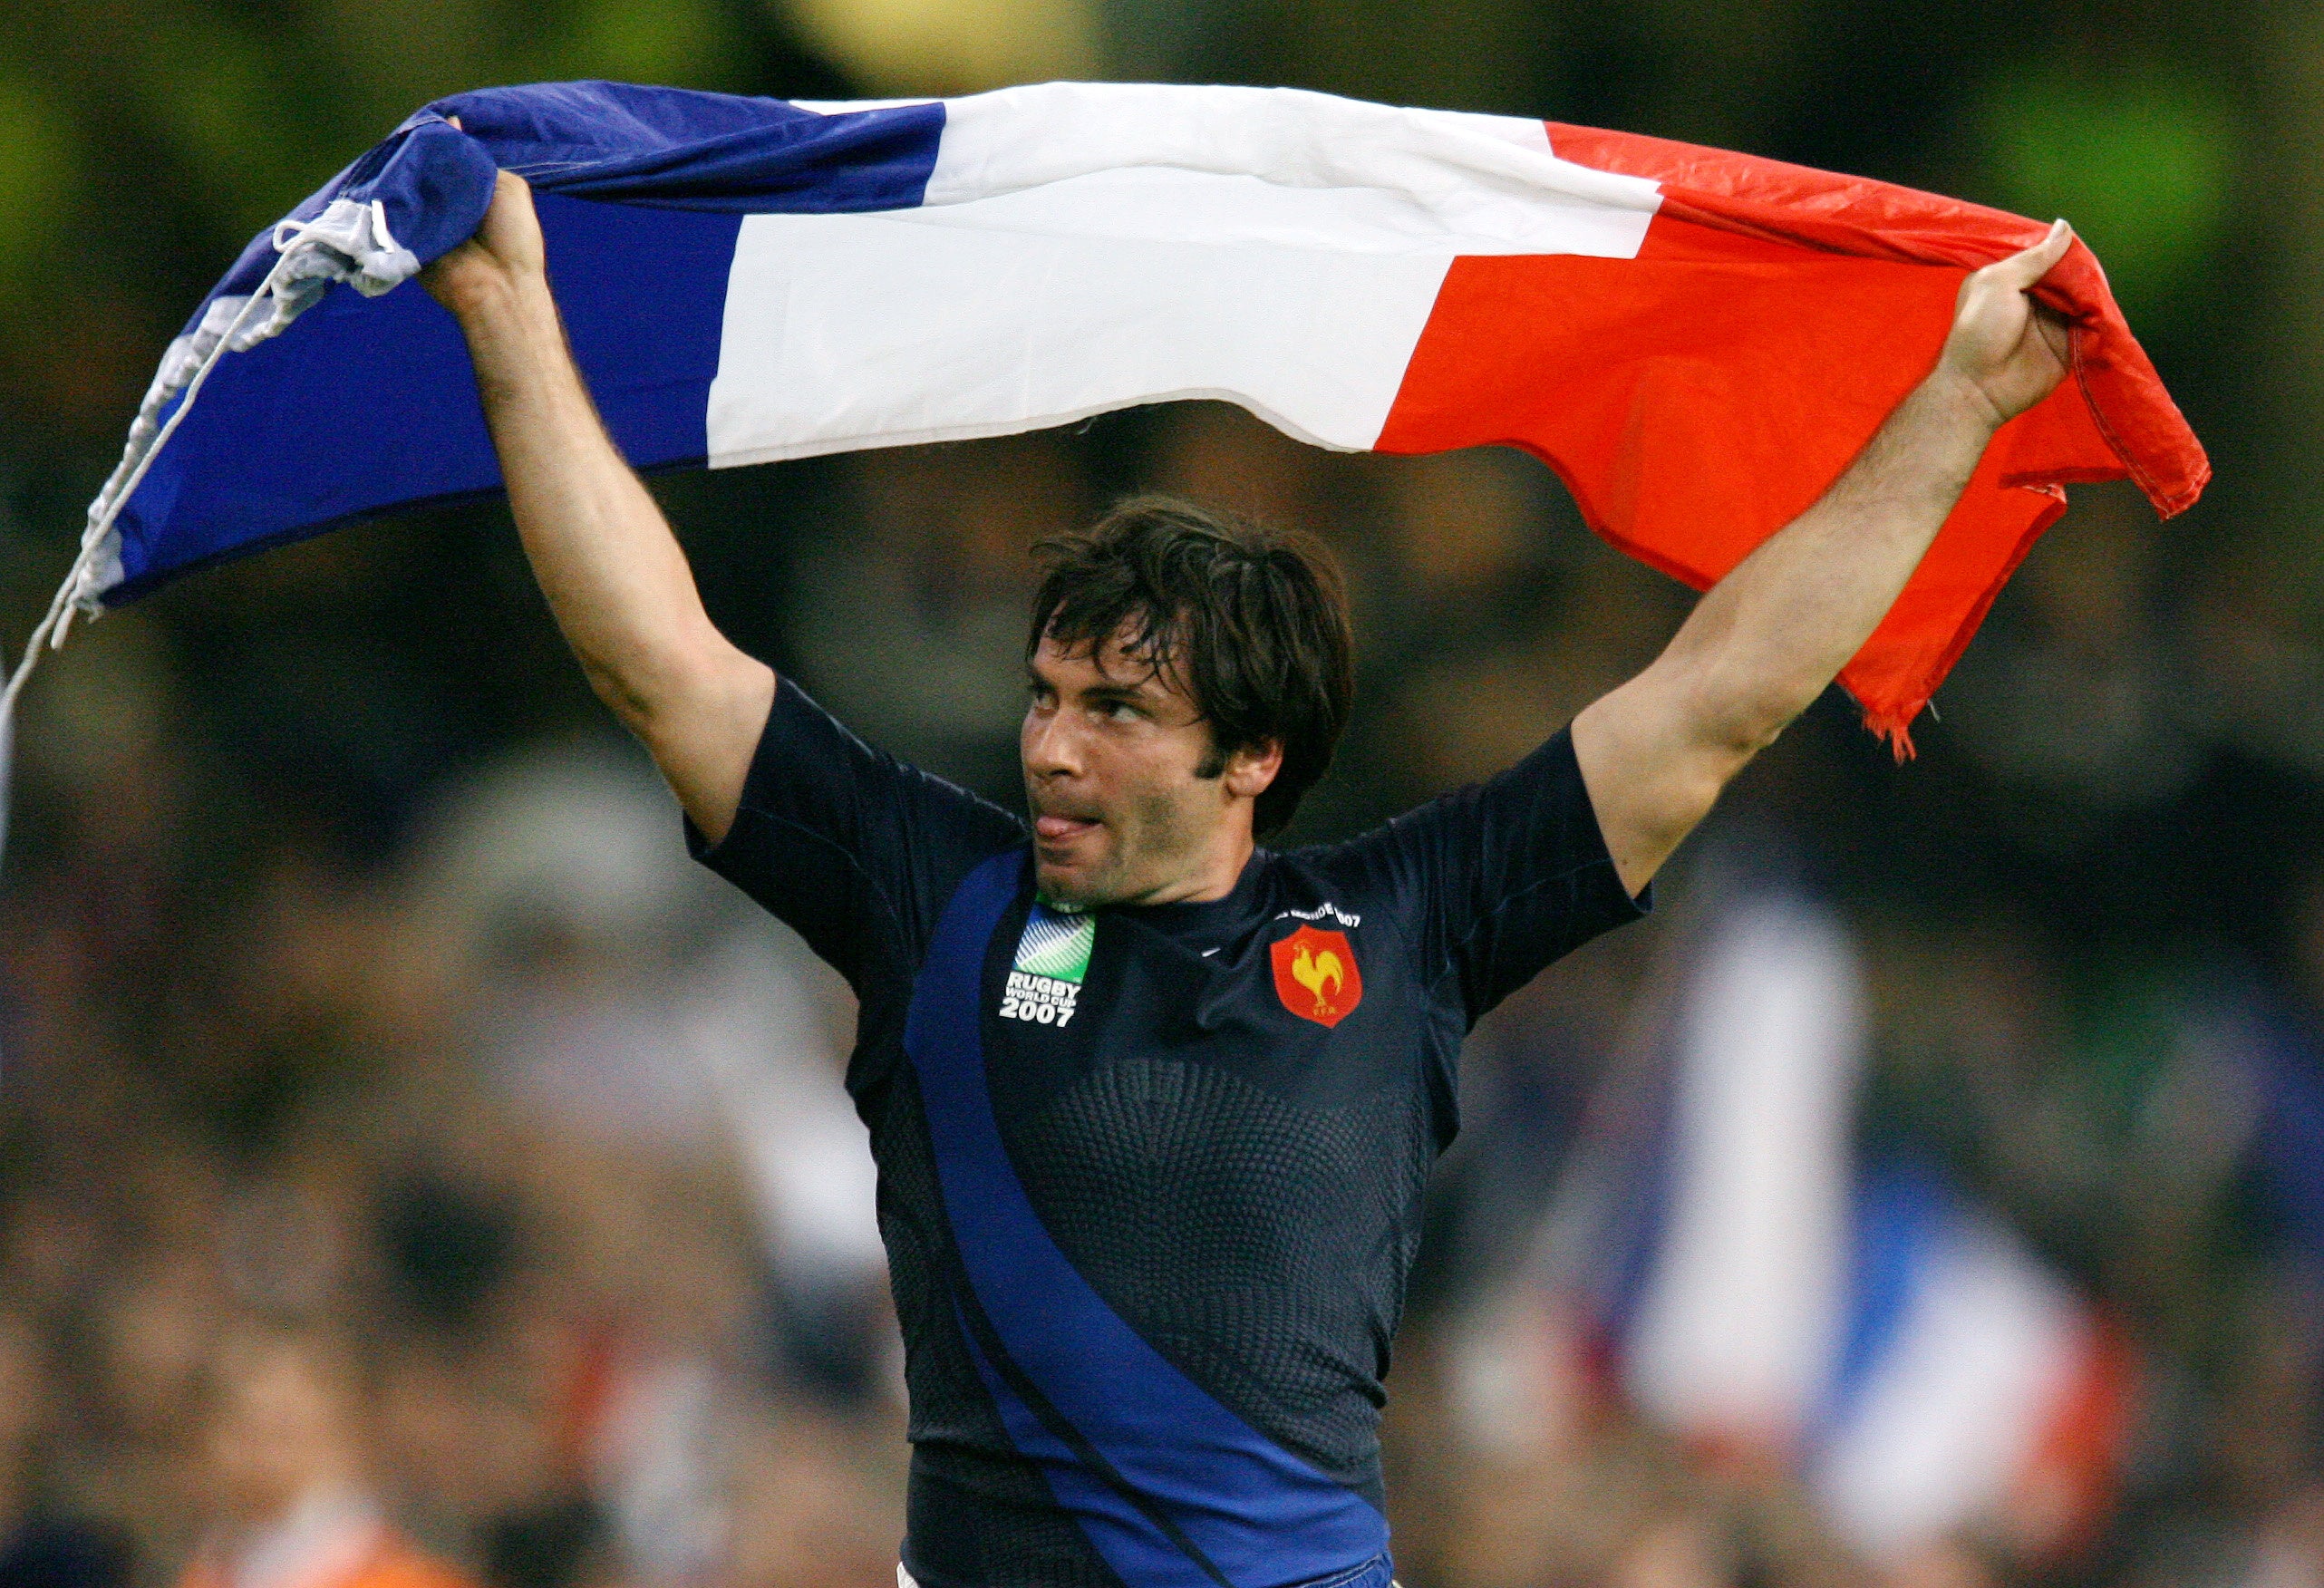 Dominici played at three Rugby World Cups for France